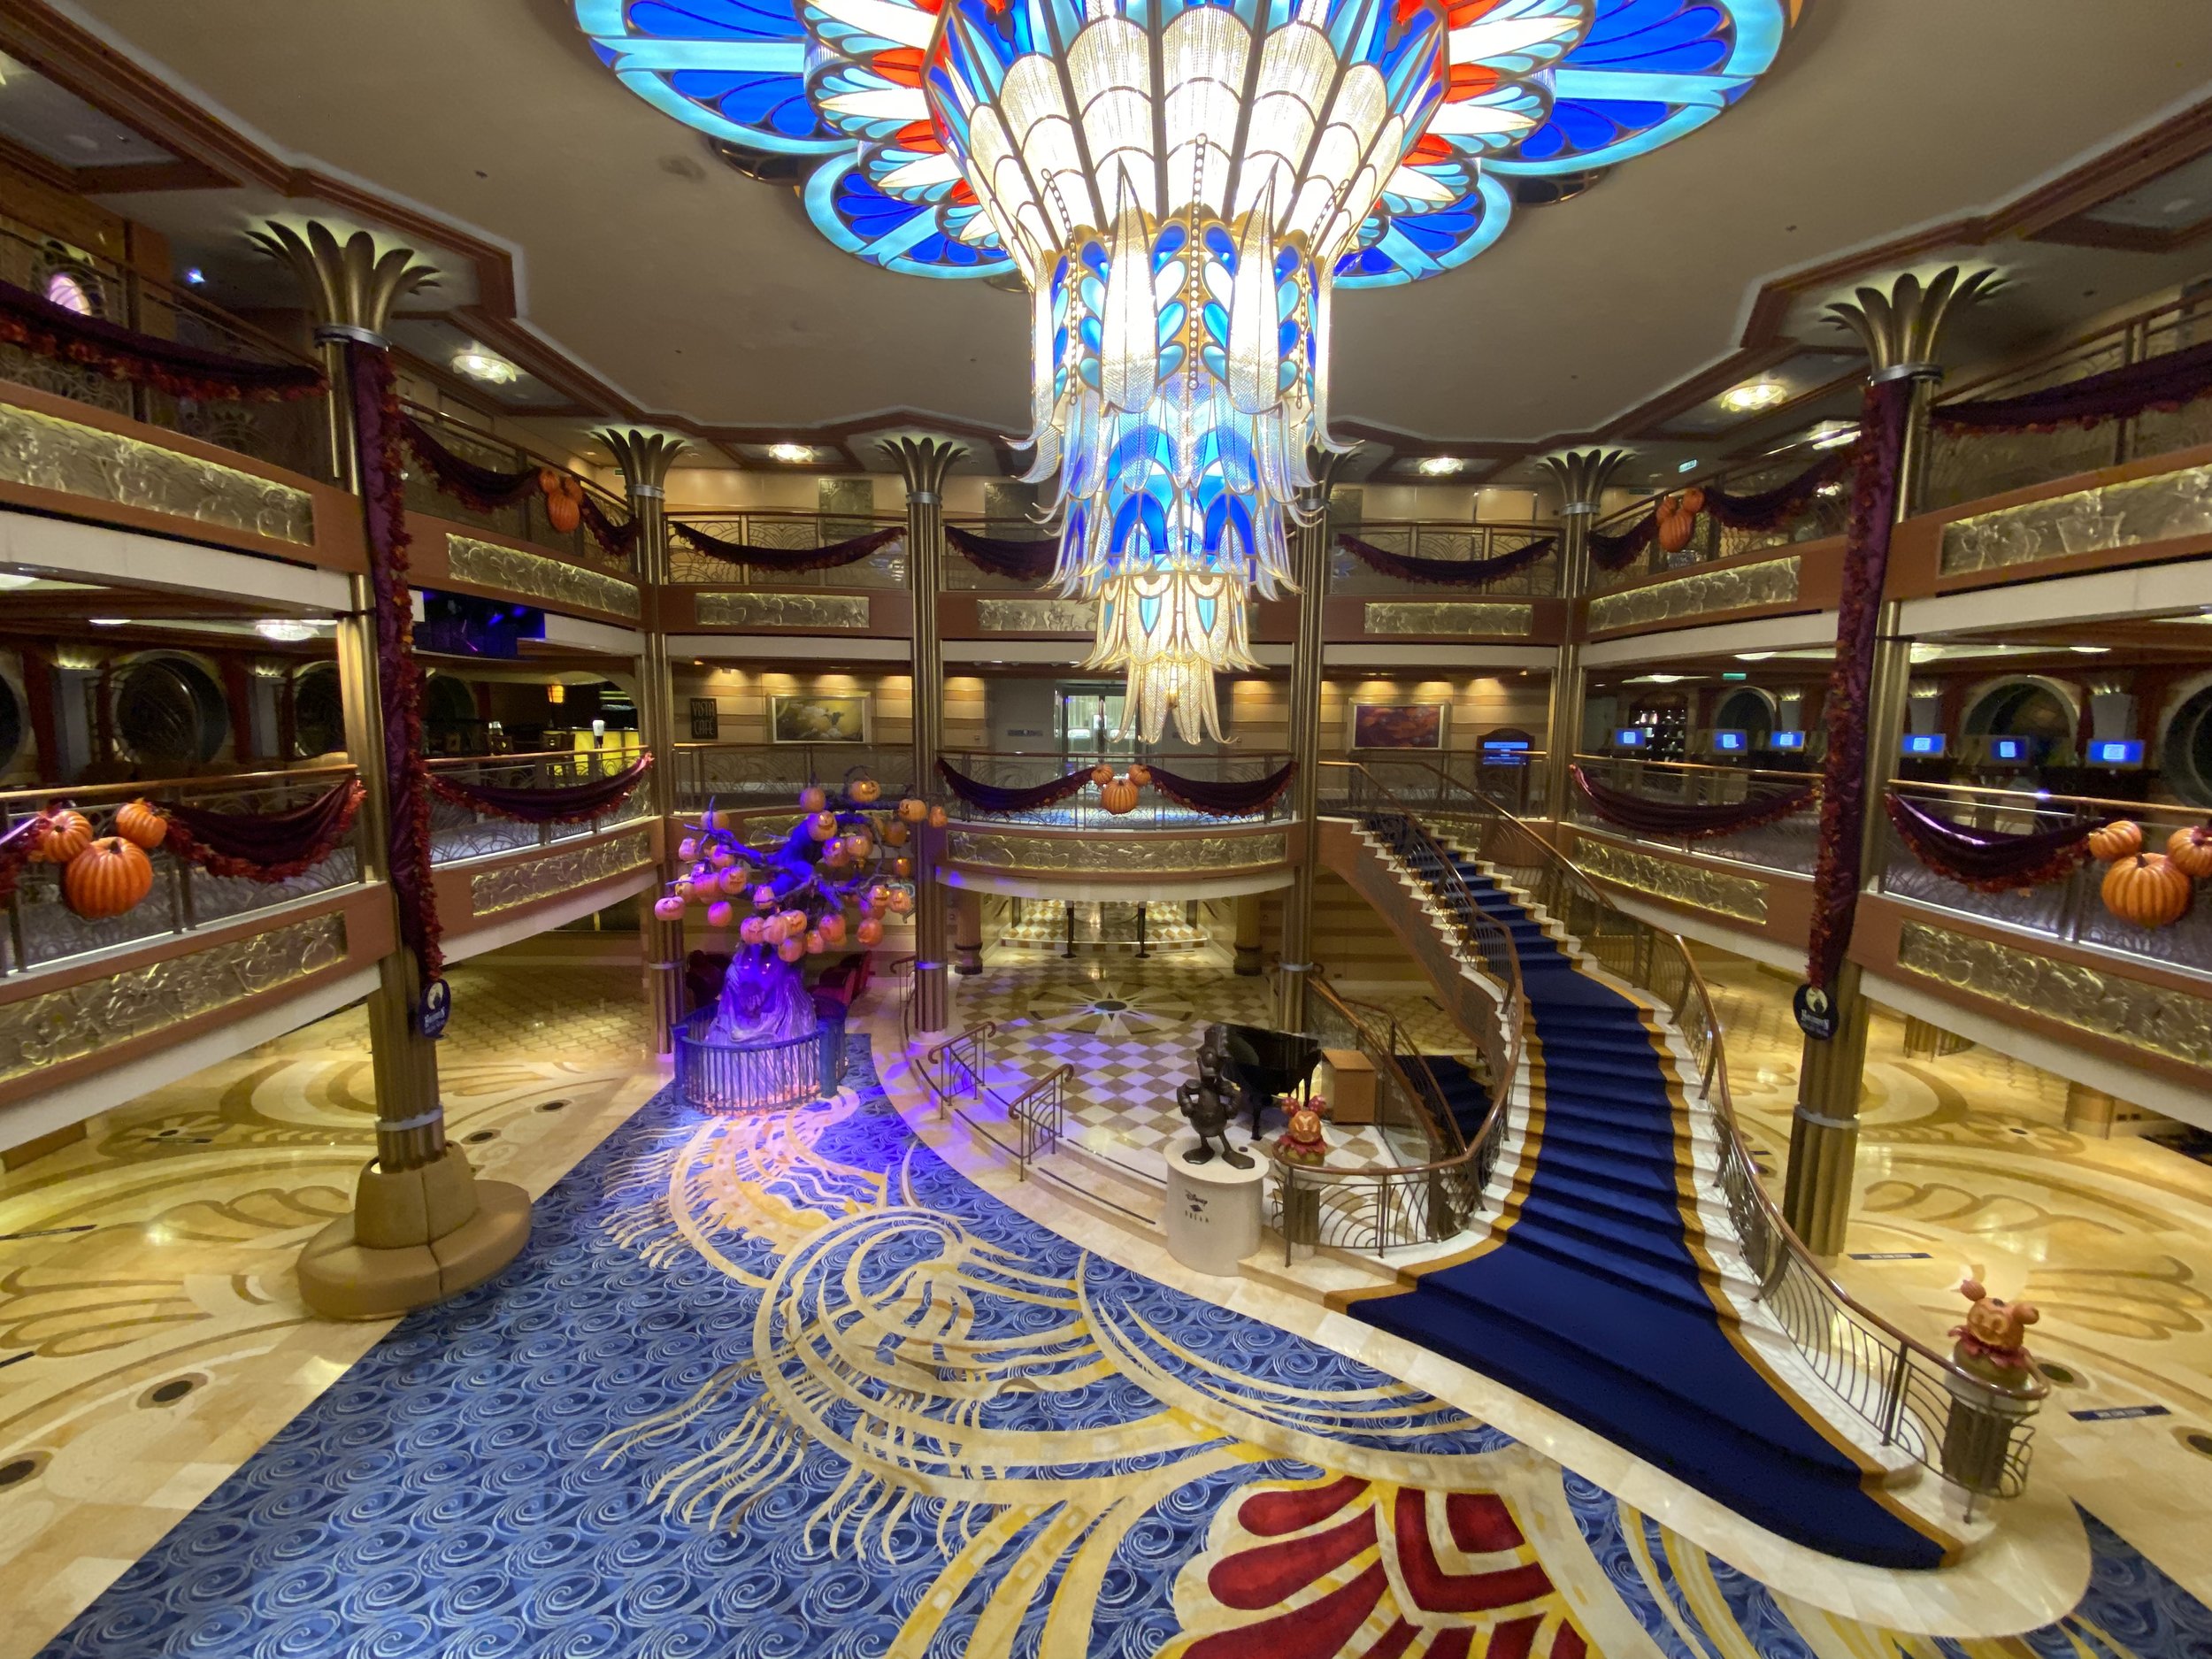  I’m a huge Disney fan, but one of my favorite things about Disney Cruise Line is that the ships are modeled after the ocean liners from the golden age of ship travel. A lot people say it feels like being on…well, I don’t want to say the name of the 